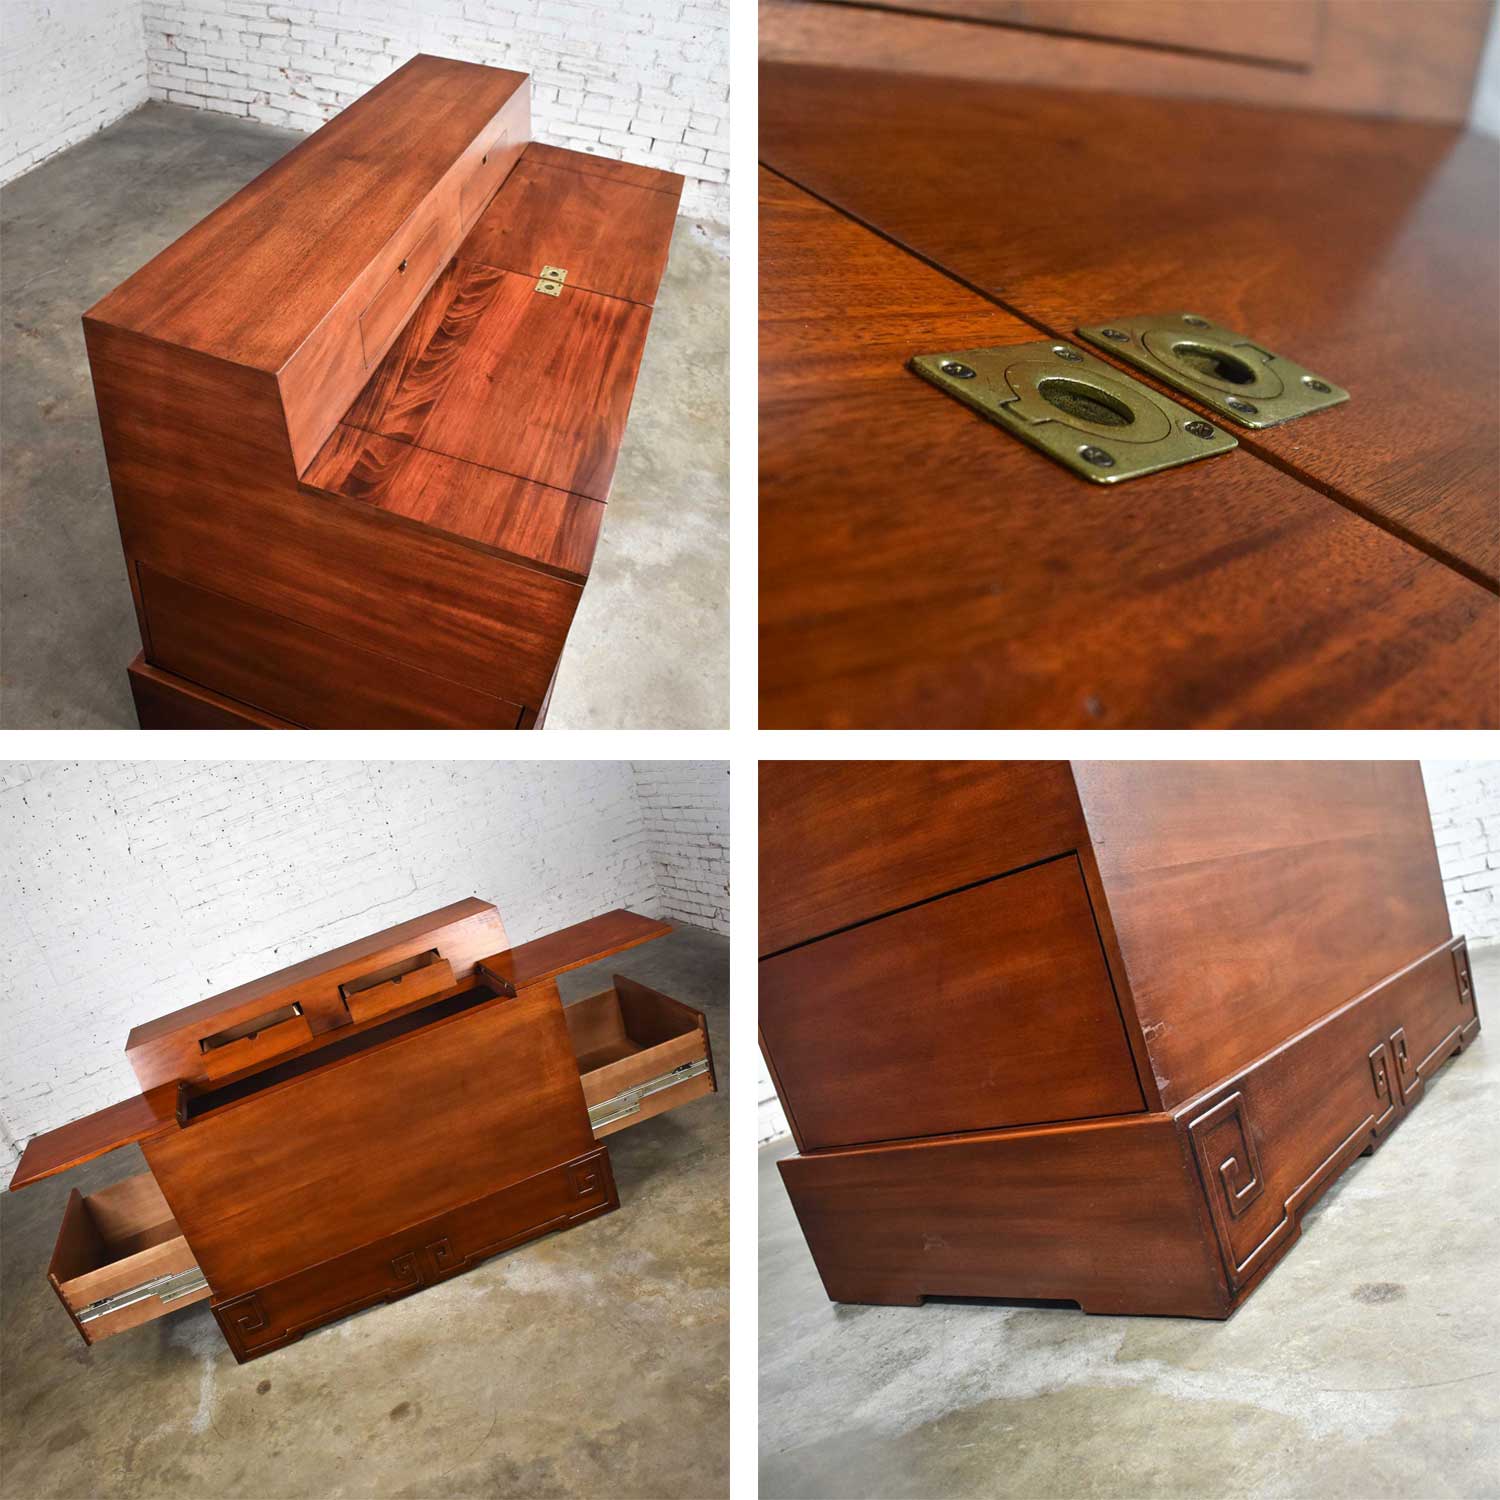 Art Deco Style Mahogany Entry Desk or Bar by IMA S.A. Bogota, Colombia